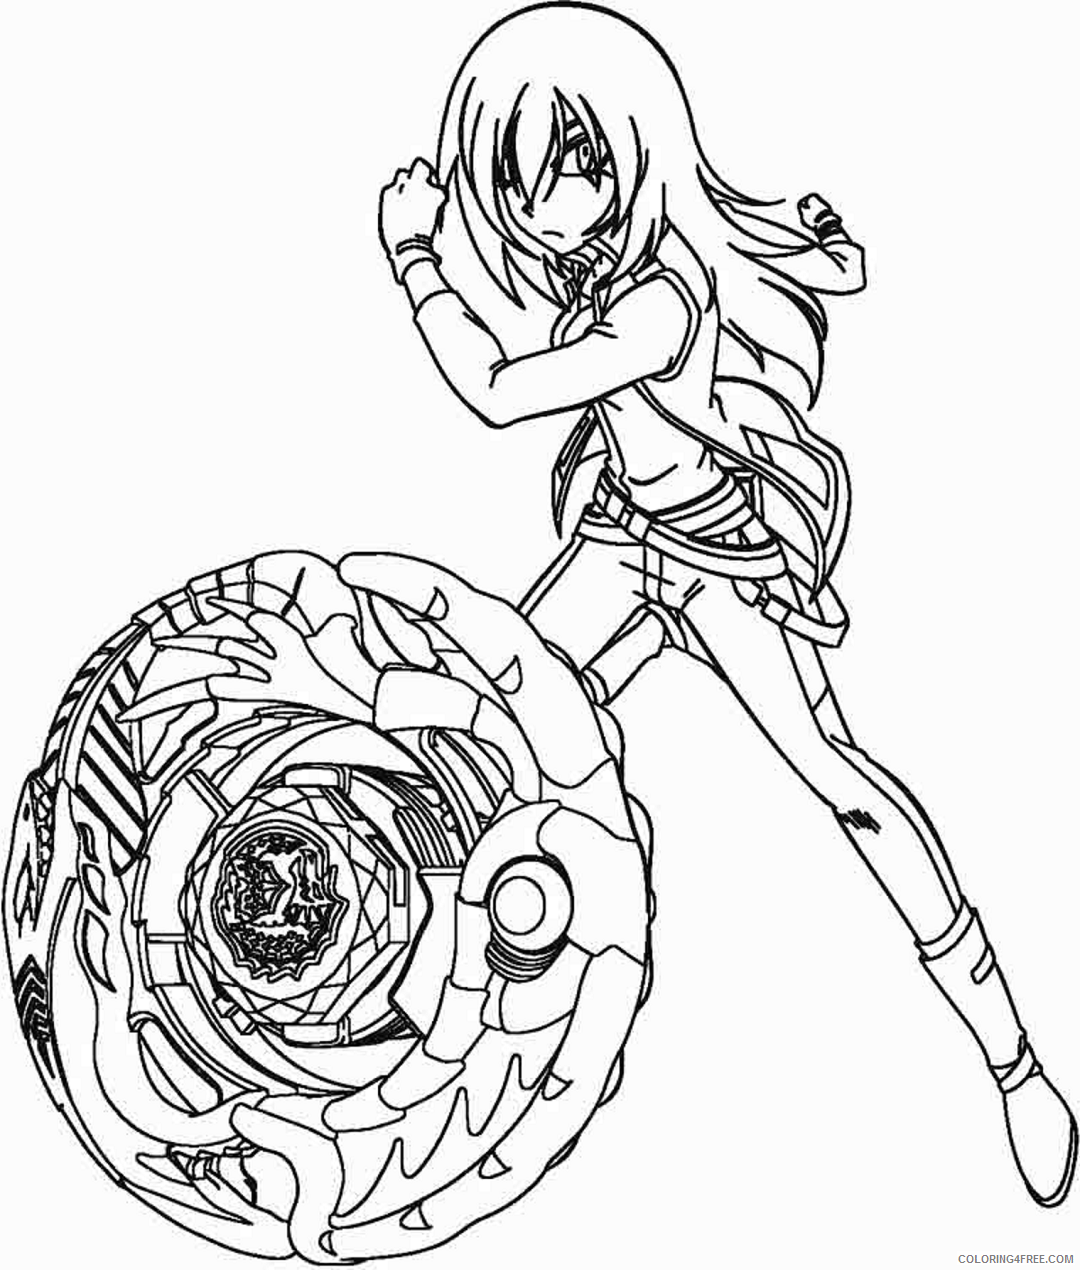 Beyblade Coloring Pages Anime tsubasa_with_his_beyblade Printable 2021 003 Coloring4free